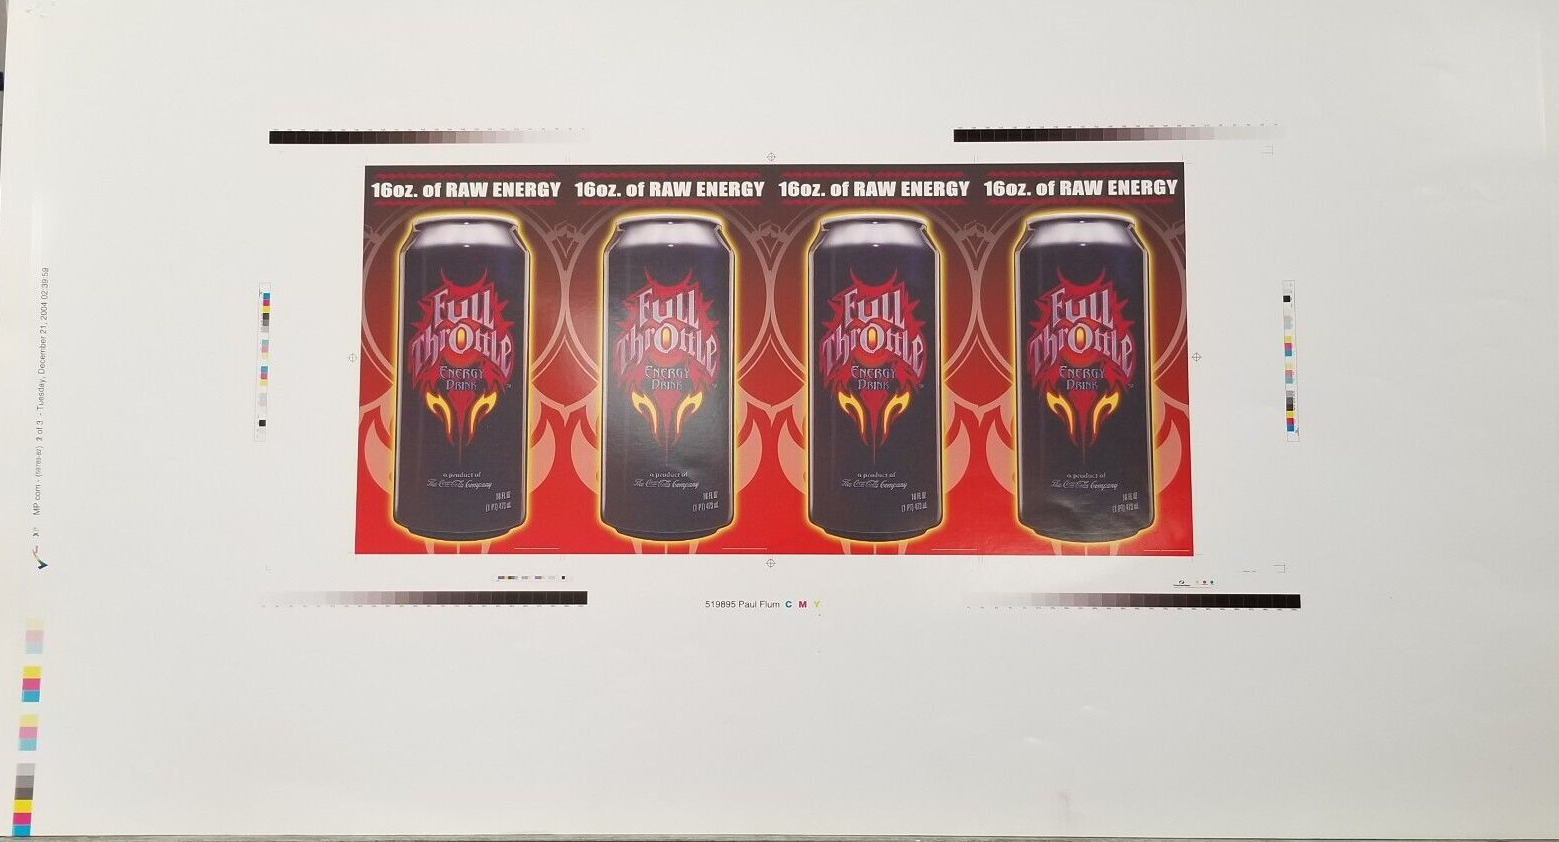 Full Throttle Energy Drink 16 oz of Raw Energy Pre Production POS Advertising